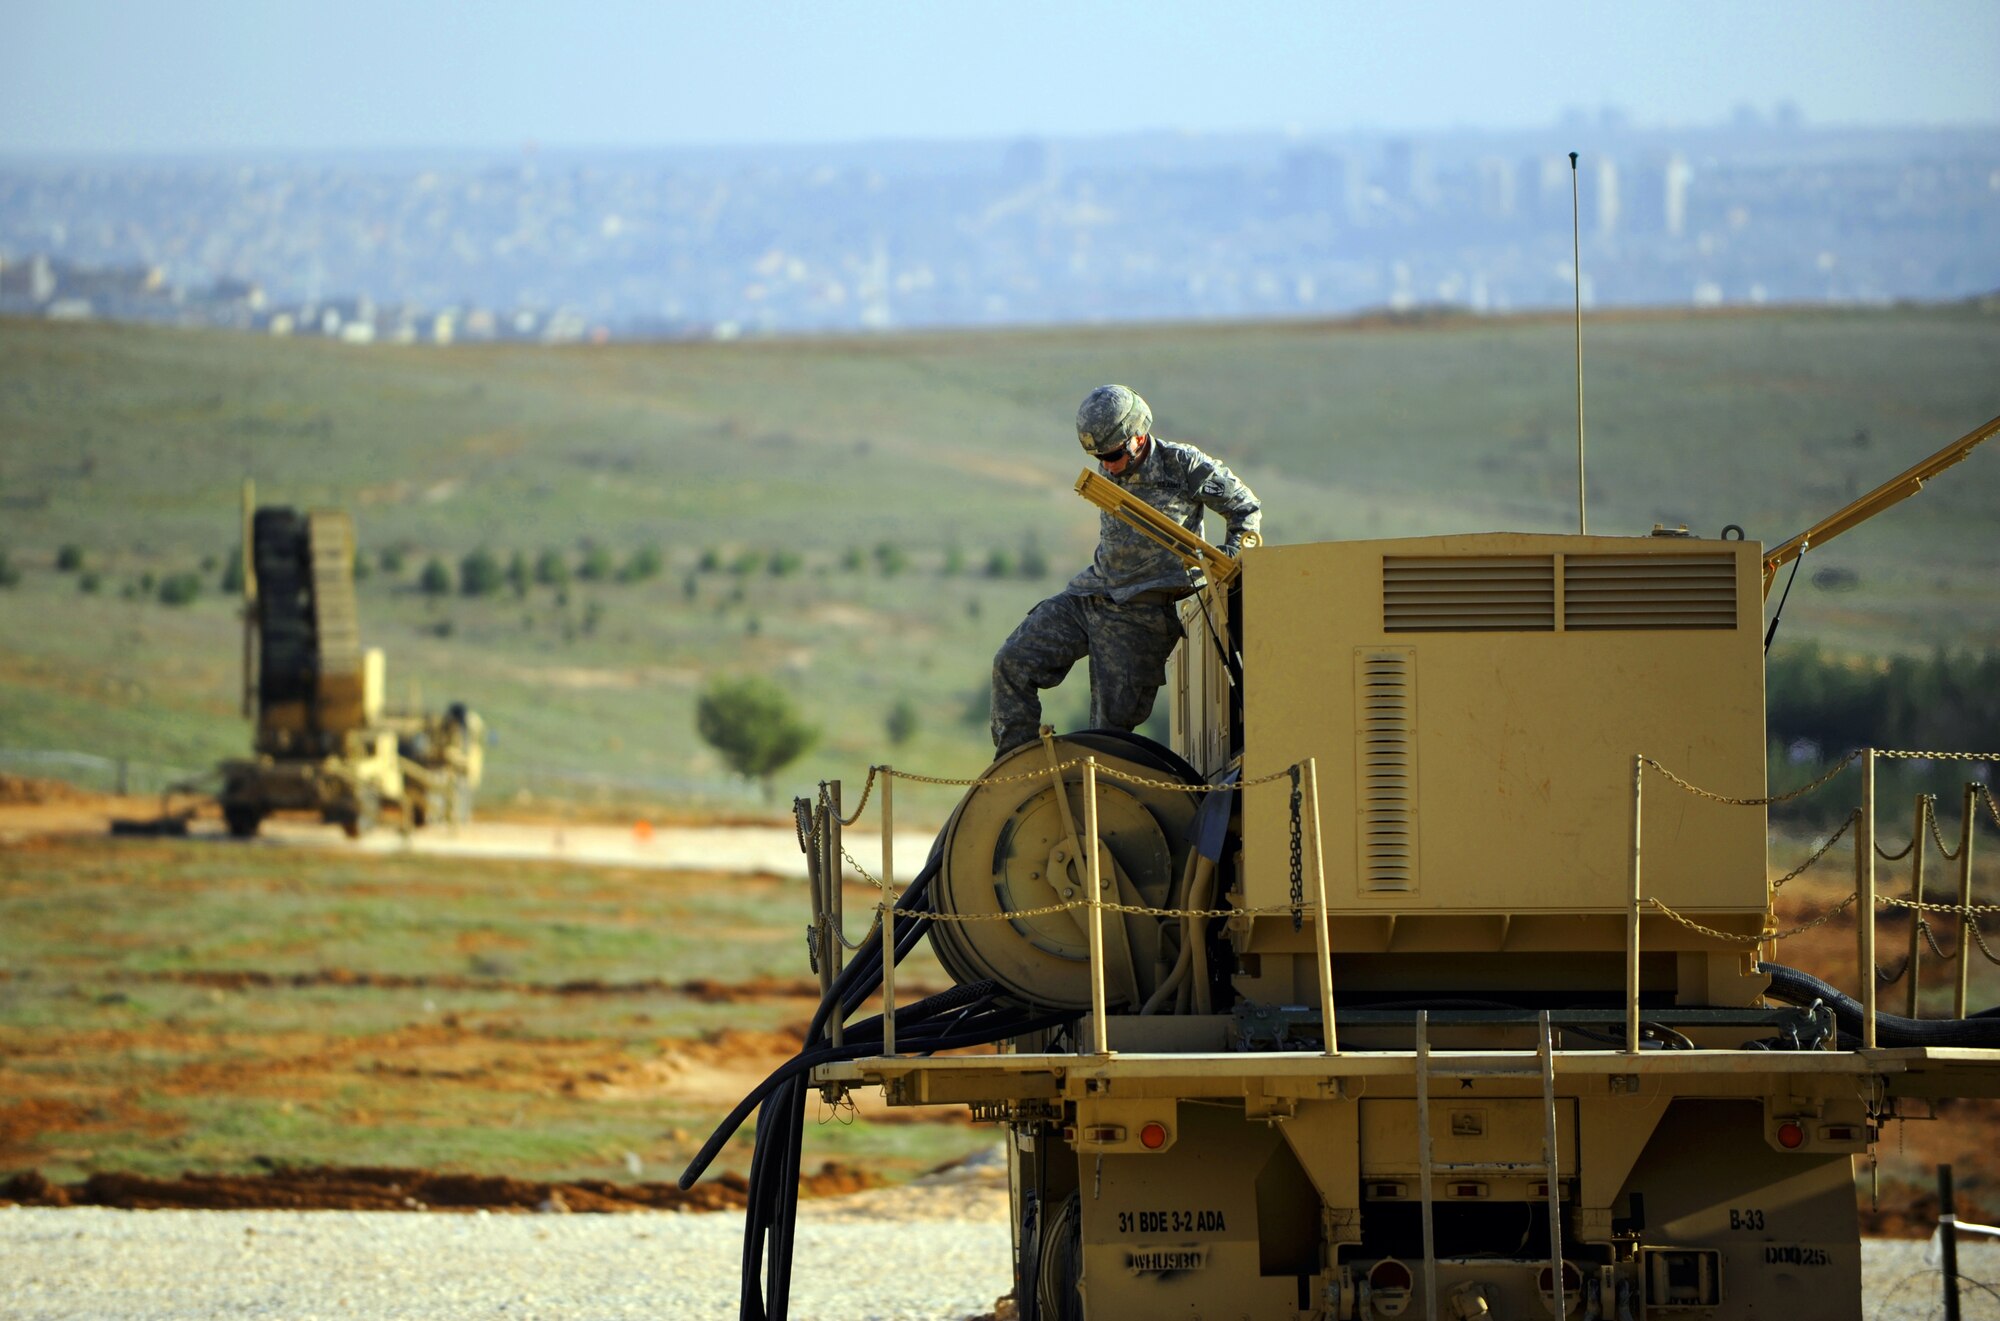 A U.S. Army soldier from Fort Sill, Okla. climbs down from an Electrical Power Plant after refueling it Feb. 28, 2013, near Gaziantep, Turkey. EPPs are used to power the Patriot battery site’s equipment. (U.S. Air Force photo by Senior Airman Daniel Phelps/Released)